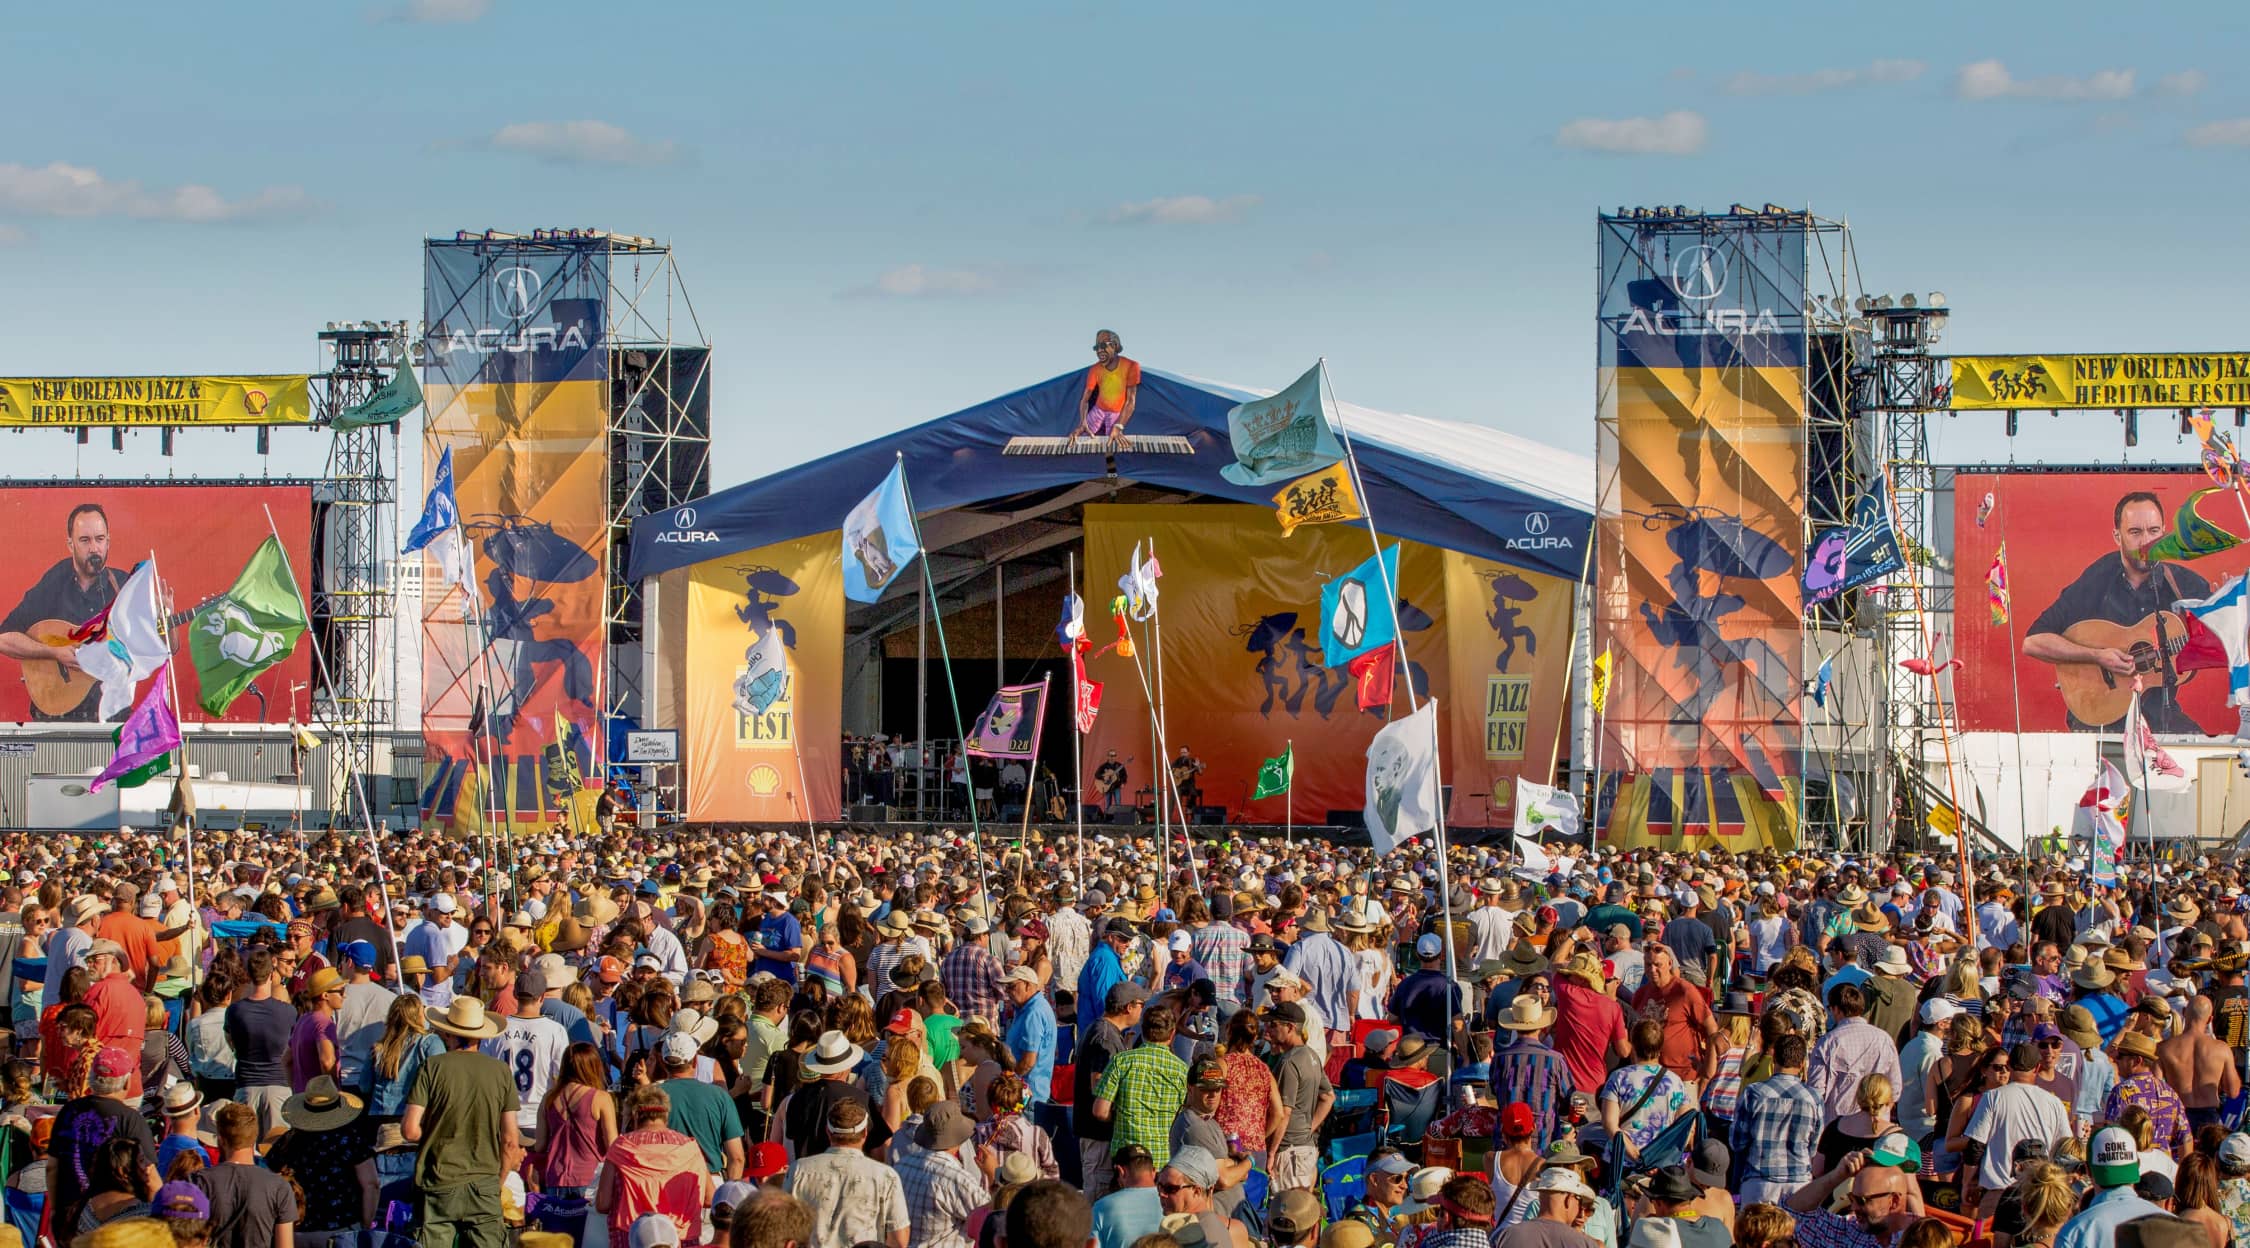 New Orleans Jazz And Heritage Festival: Weekend 1 - 3 Day Pass